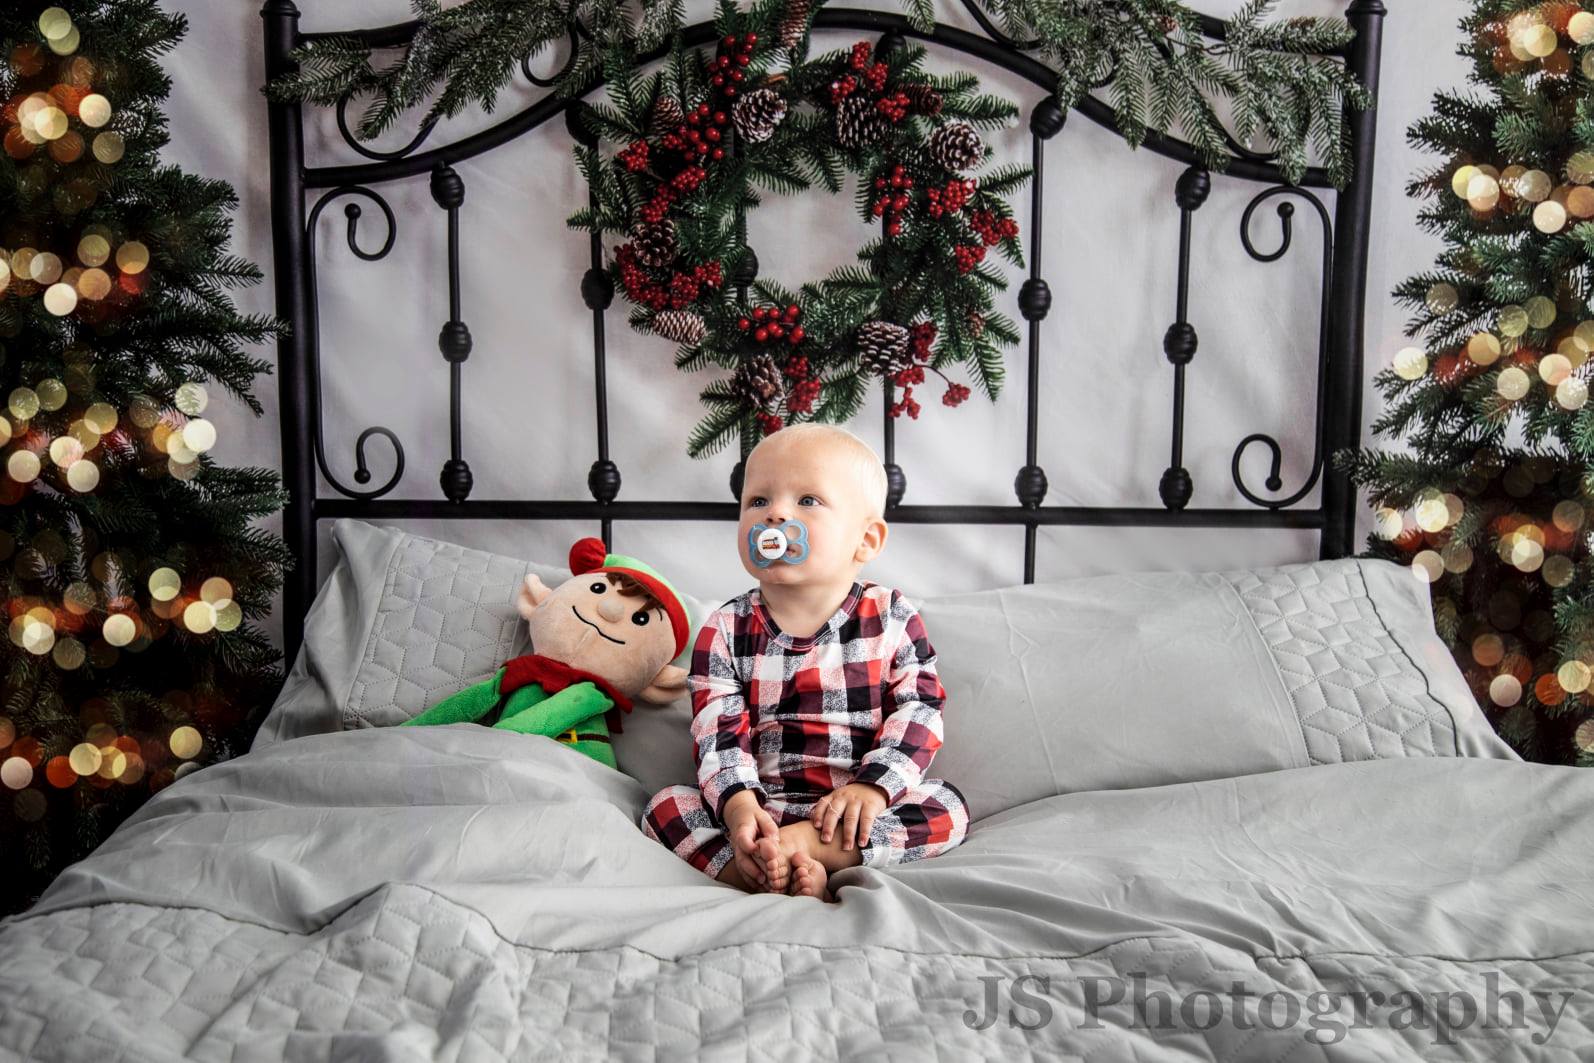 RTS Kate Christmas Bed Backdrop Headboard Designed by Emetselch